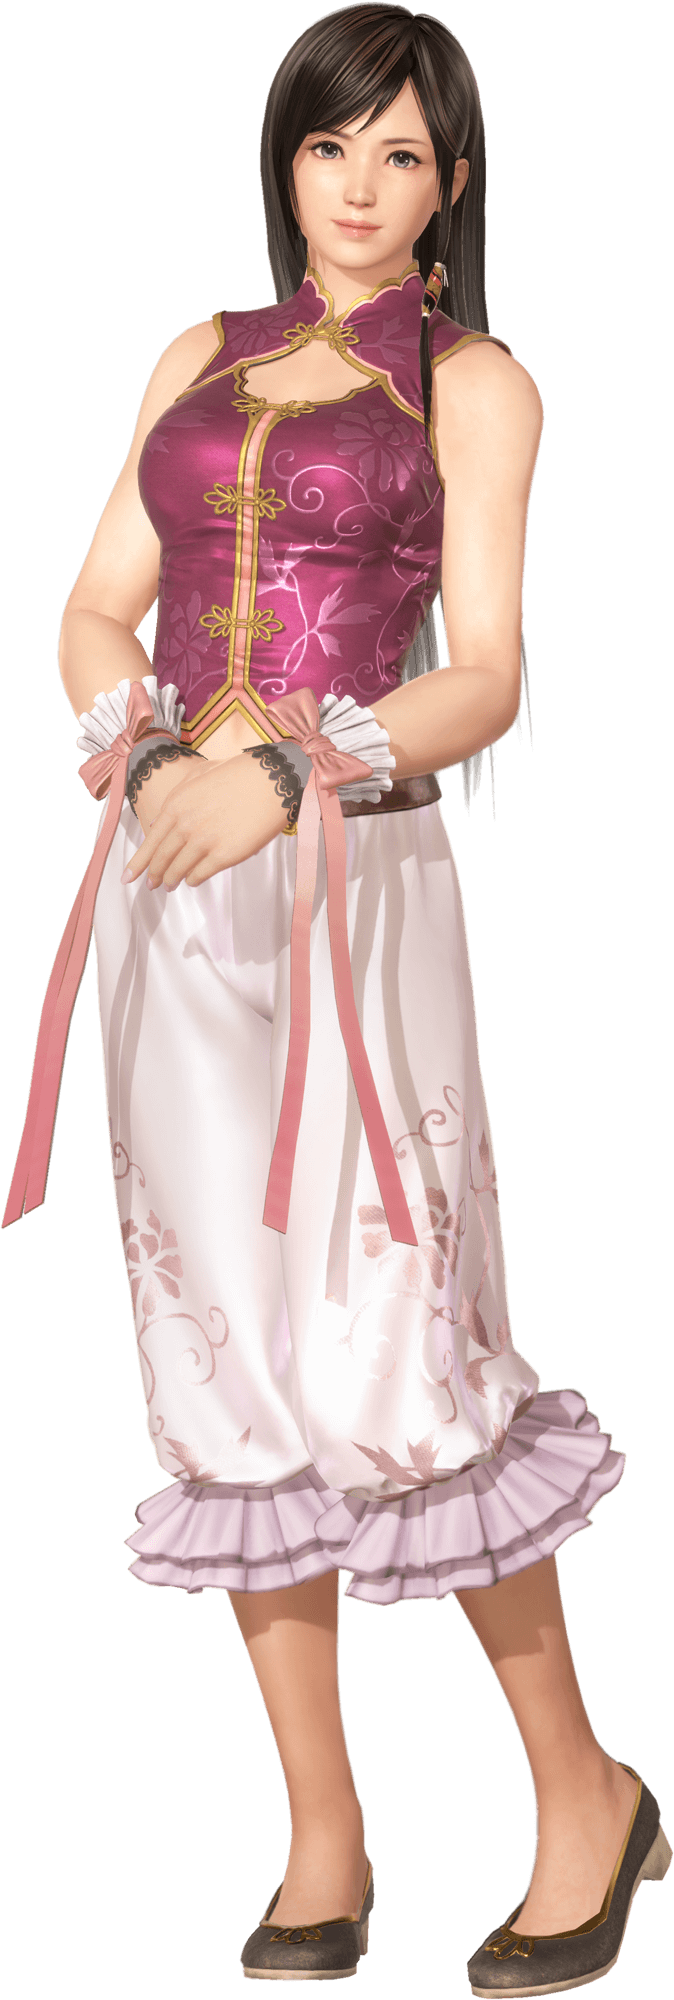 Image result for 克麗絲蒂 doa6